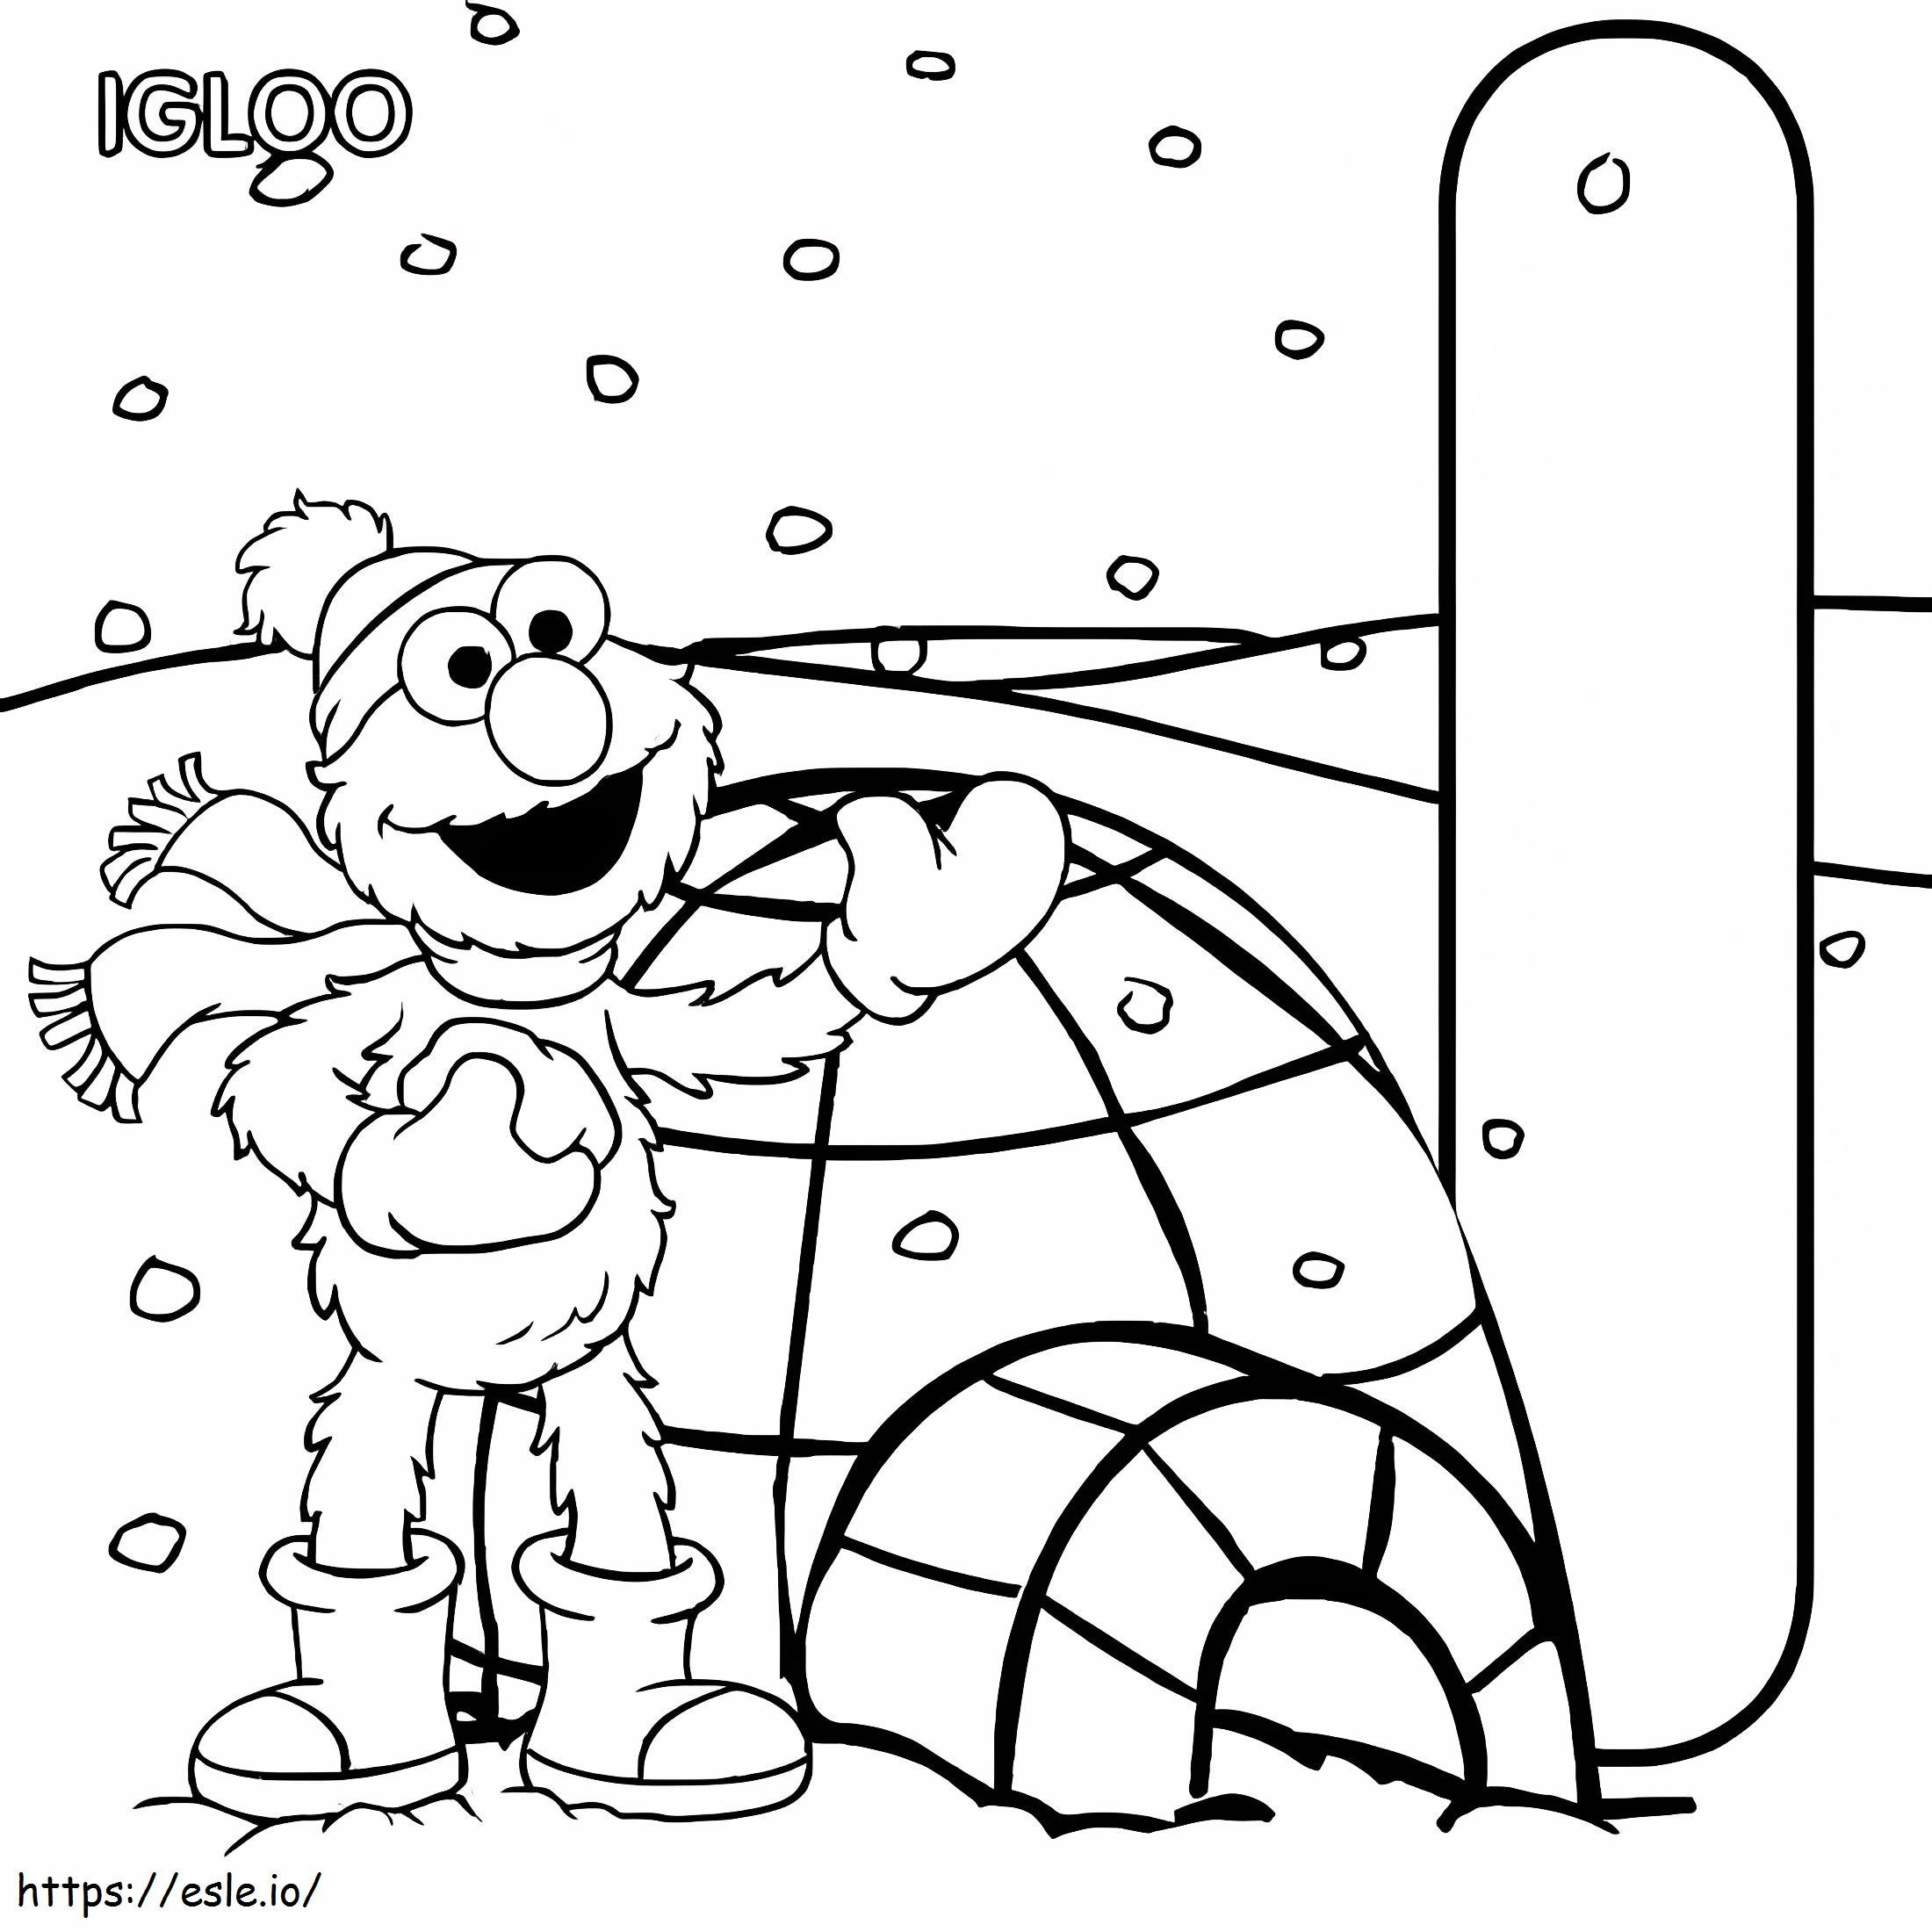 Elmo And Igloo coloring page